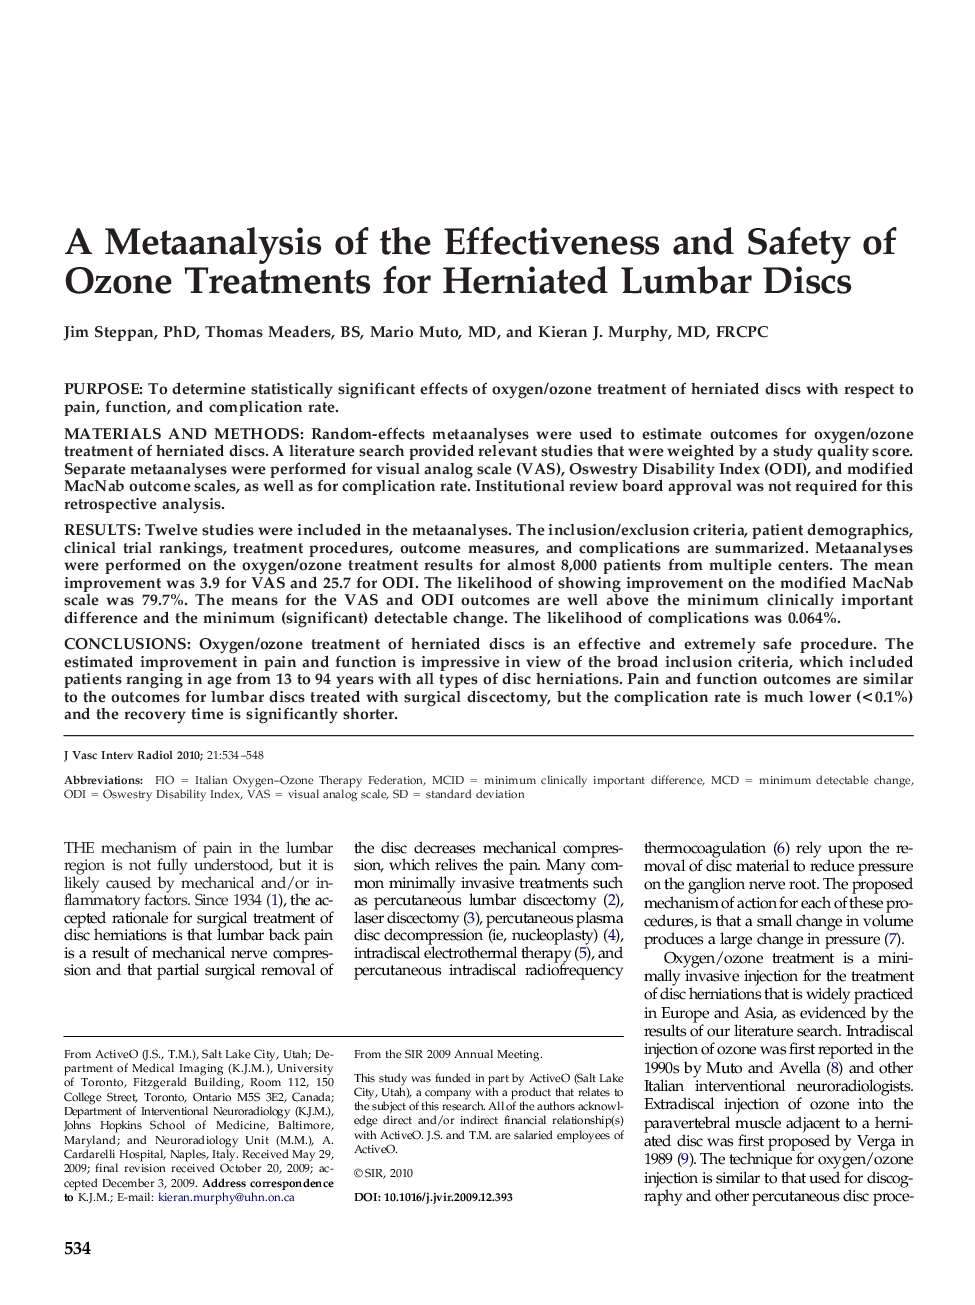 A Metaanalysis of the Effectiveness and Safety of Ozone Treatments for Herniated Lumbar Discs